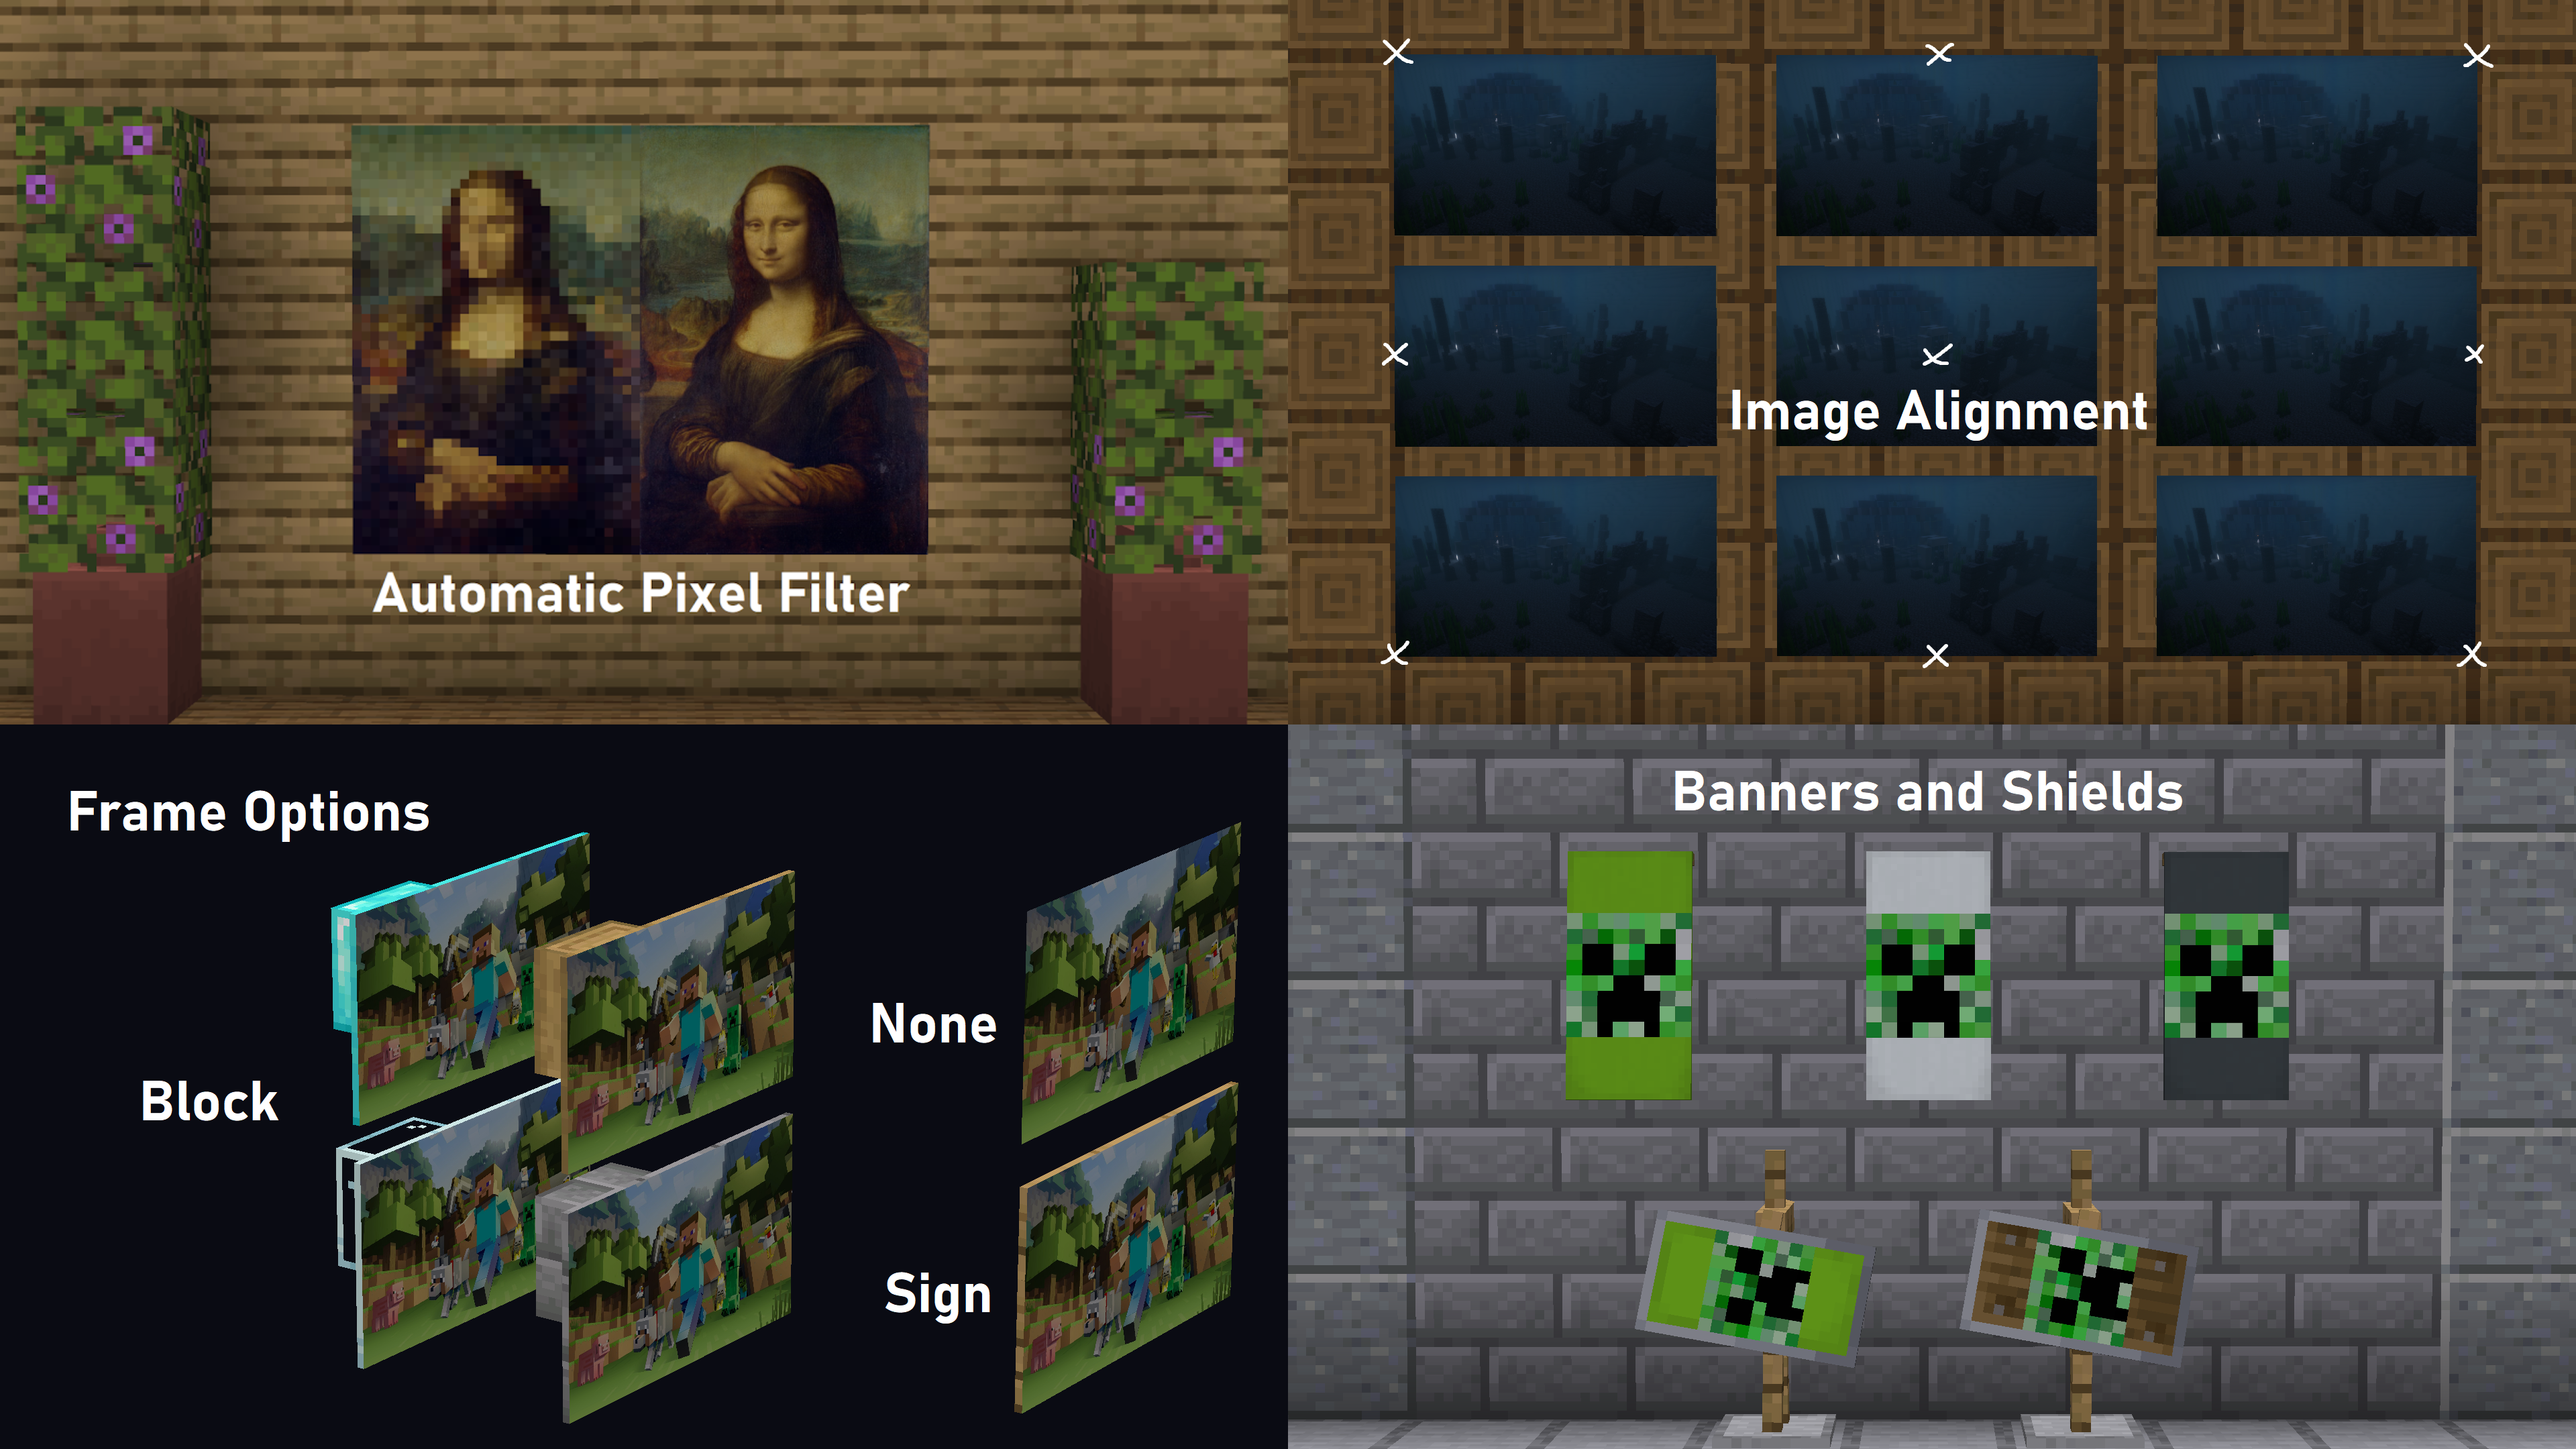 Showcase showing the main features of the mod